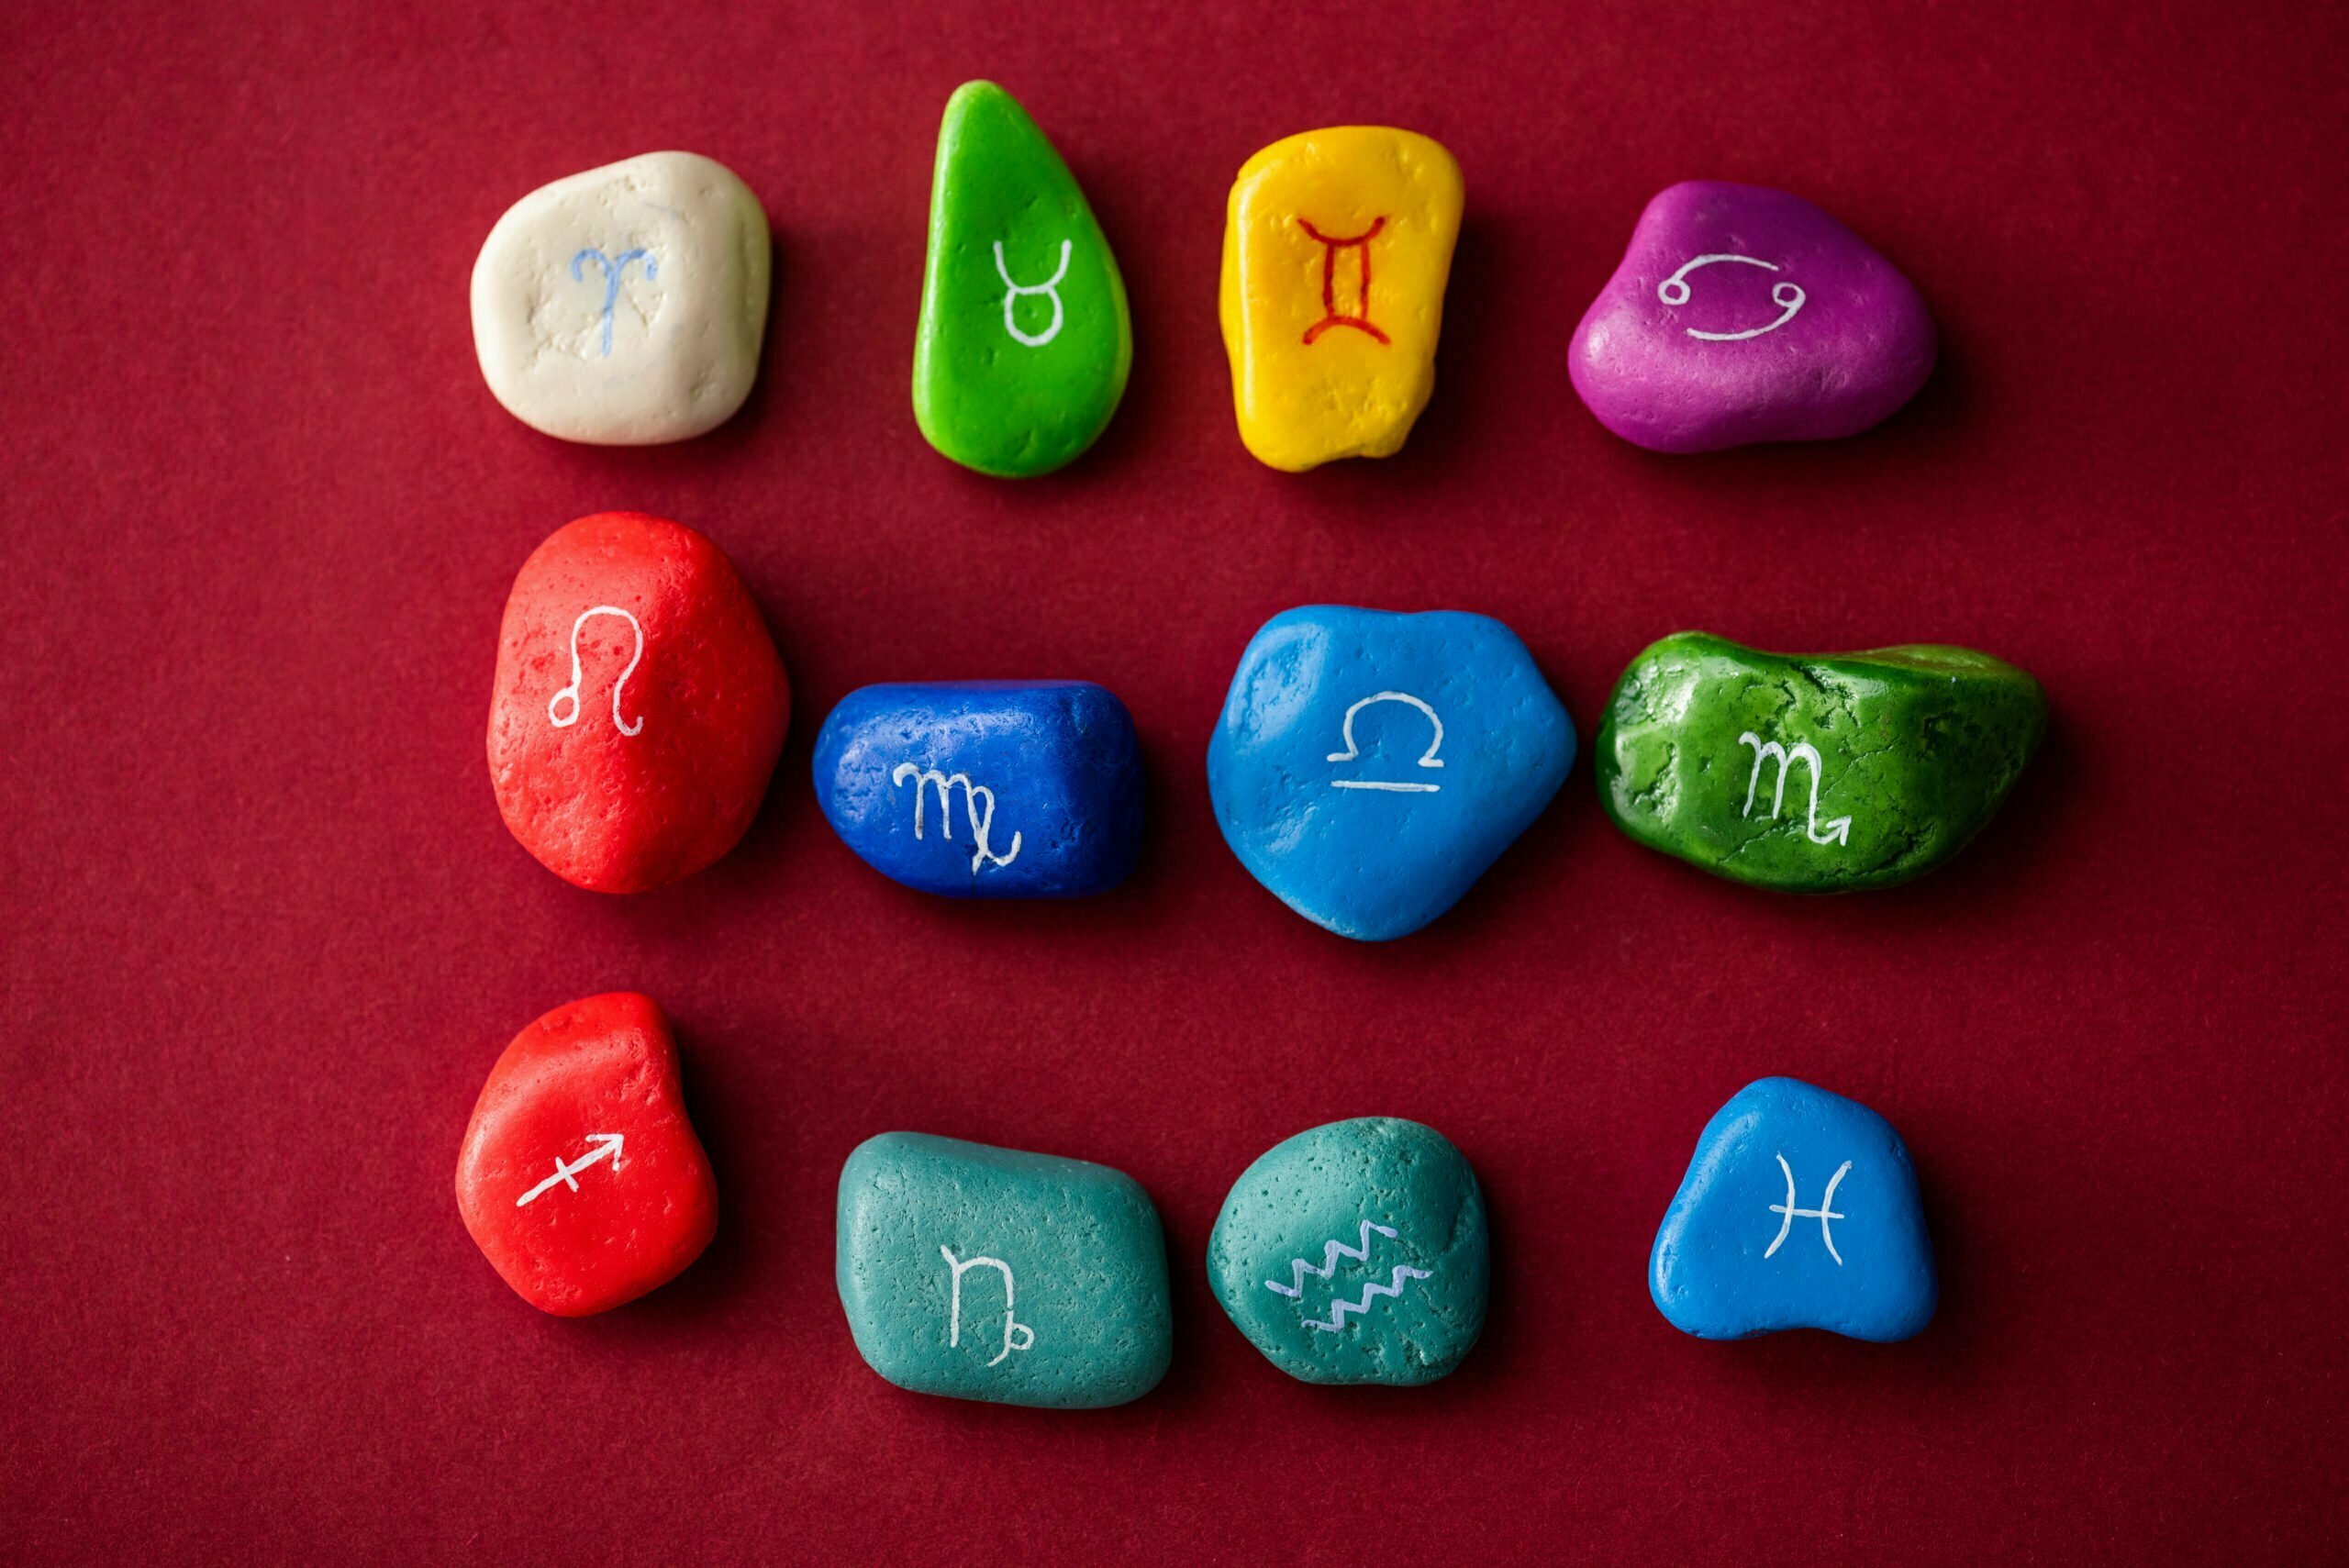 a group of colorful dice